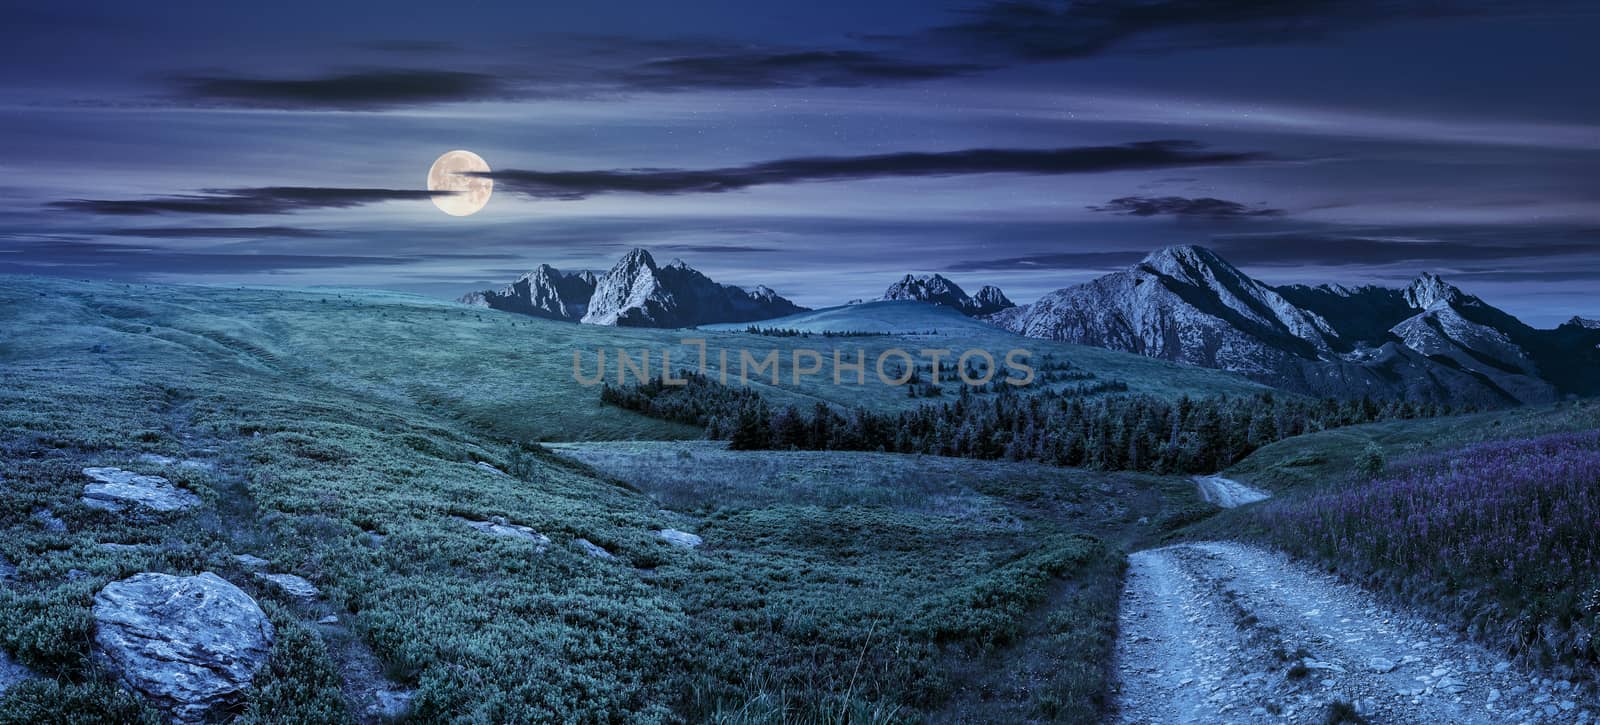 composite summer landscape with high wild grass and purple flowers near the road to forest on mountain hillside and rocky peaks in the distance at night in full moon light